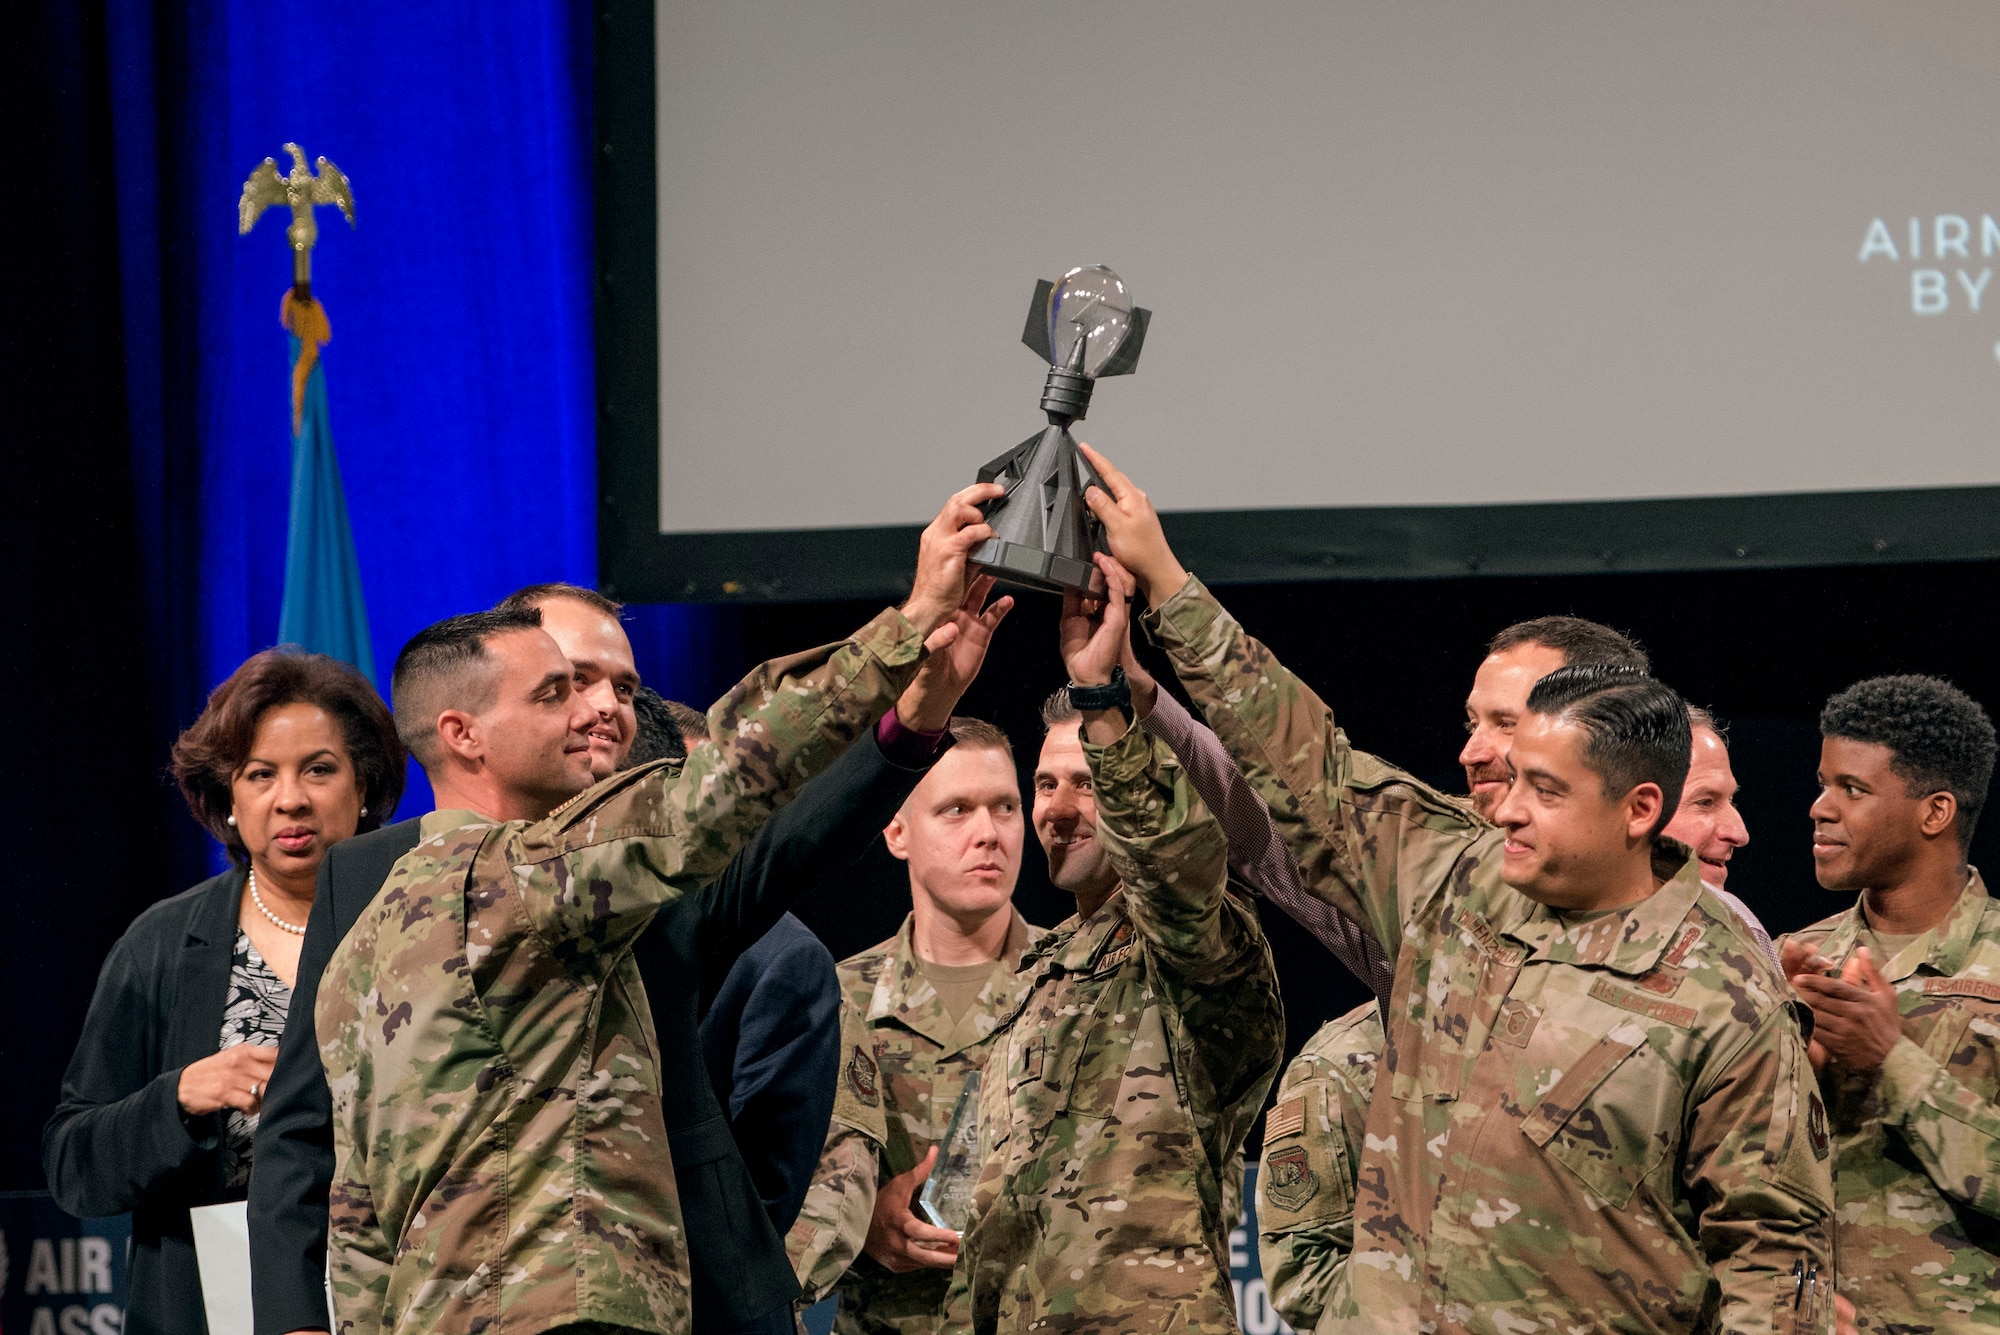 Airmen share the Spark Tank trophy after Air Force and industry leaders declared a two-way tie at the Air Force Association's Air Warfare Symposium, in Orlando, Fla., Feb. 28, 2020. The three-day event is a professional development forum that offers the opportunity for Department of Defense personnel to participate in forums, speeches, seminars and workshops with defense industry professionals. (U.S. Air Force photo by Staff Sgt. James Richardson)